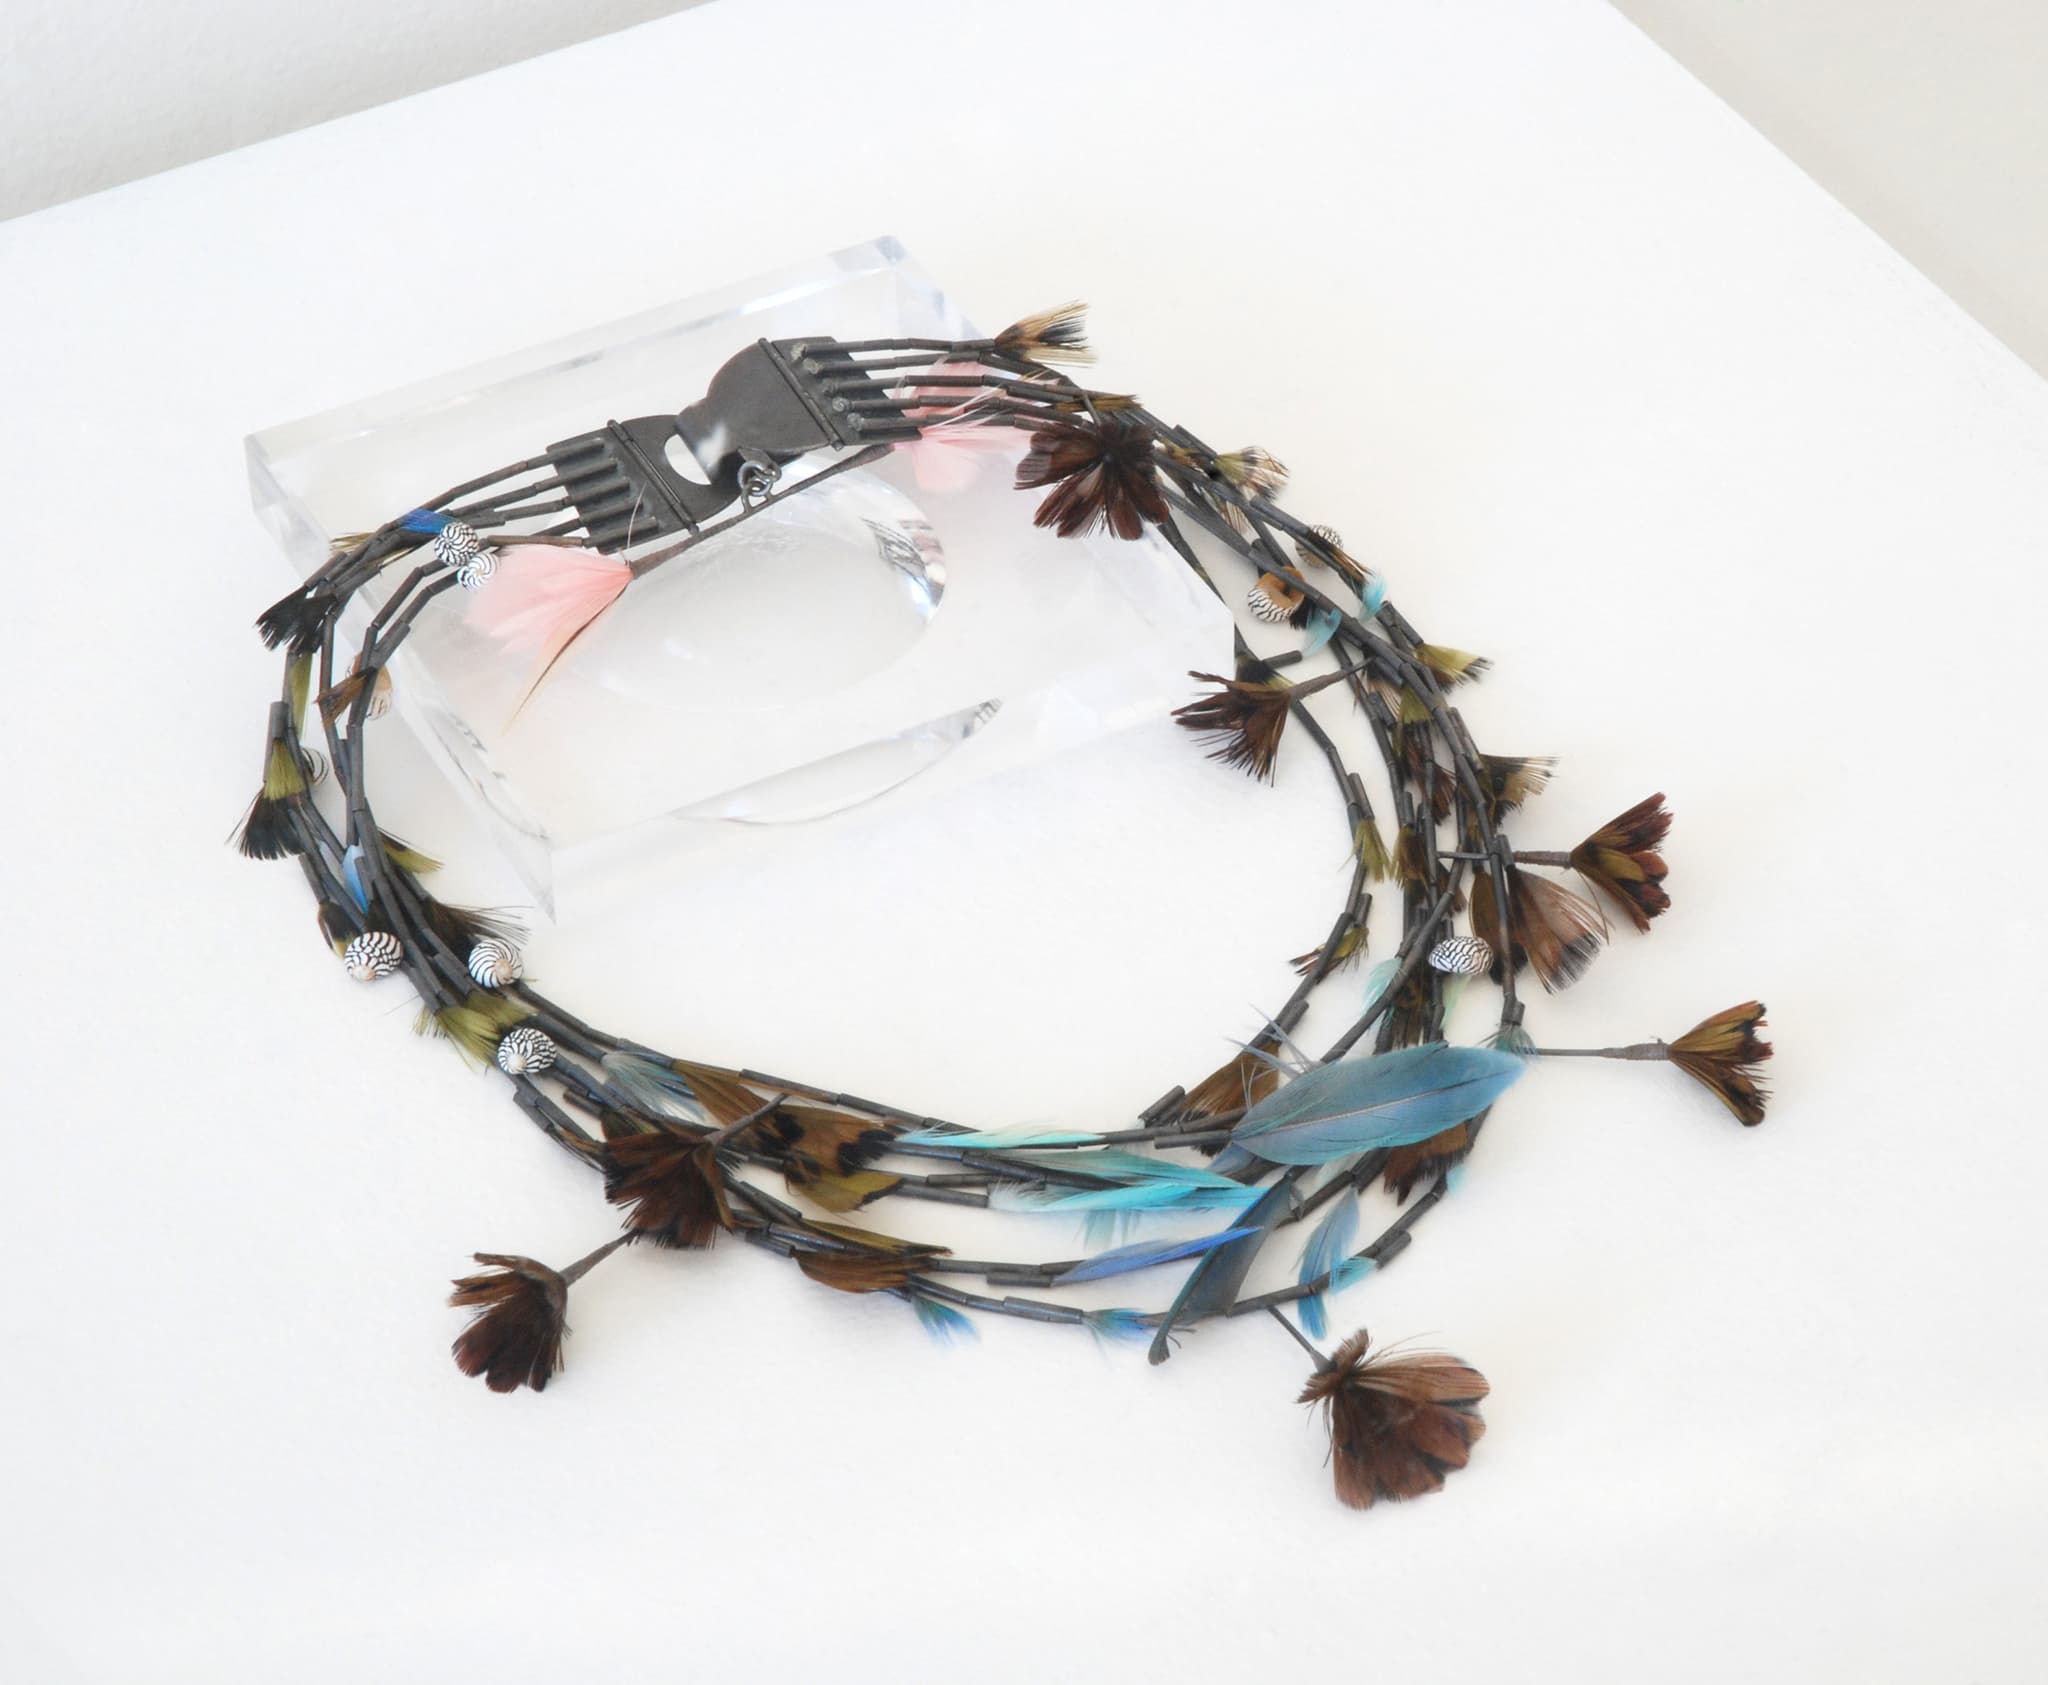 Gabrielle Gould, Pushing Down Necklace, Craft in America